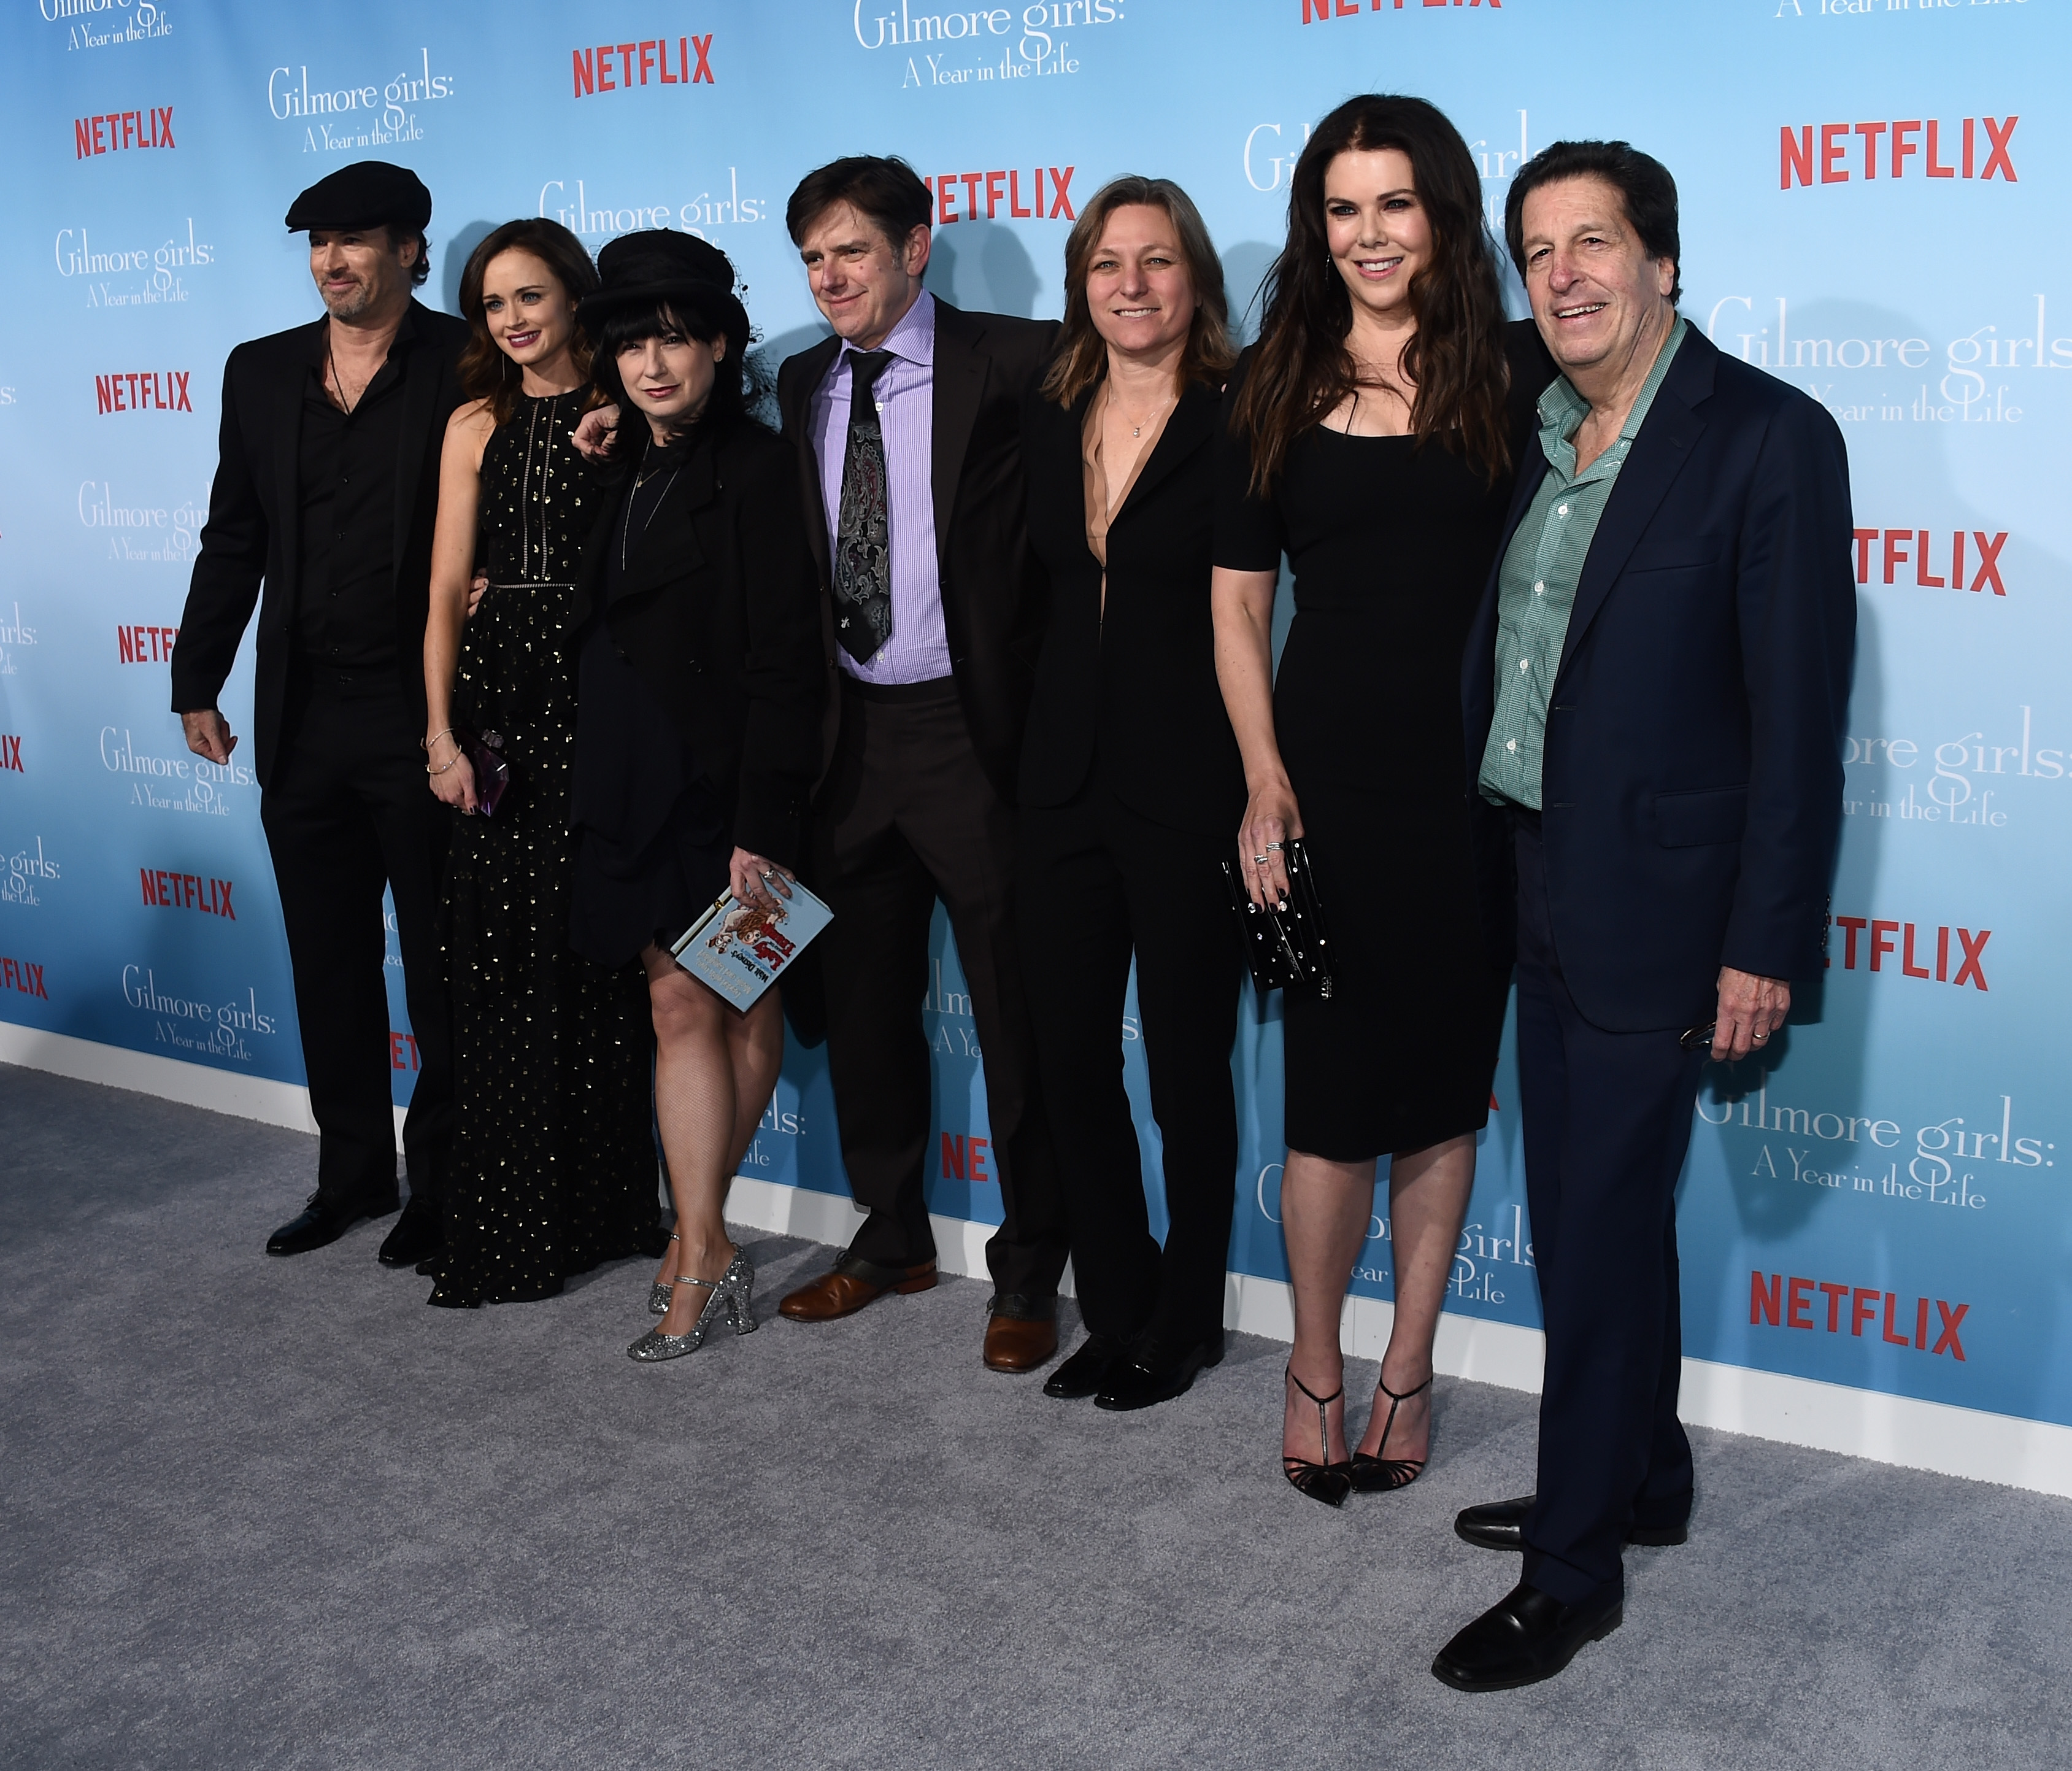 Amy Sherman-Palladino and Dan Palladino are flanked by 'Gilmore Girls: A Year in the Life' cast members, Scott Patterson, Alexis Bledel, and Lauren Graham. Also in the picture are Cindy Holland, VP for original Content at Netflix, and President and Chief Content Officer for Warner Bros. Televsion Group, Peter Roth. The group was together for the premiere of 'Gilmore Girls: A Year in the Life' in 2016